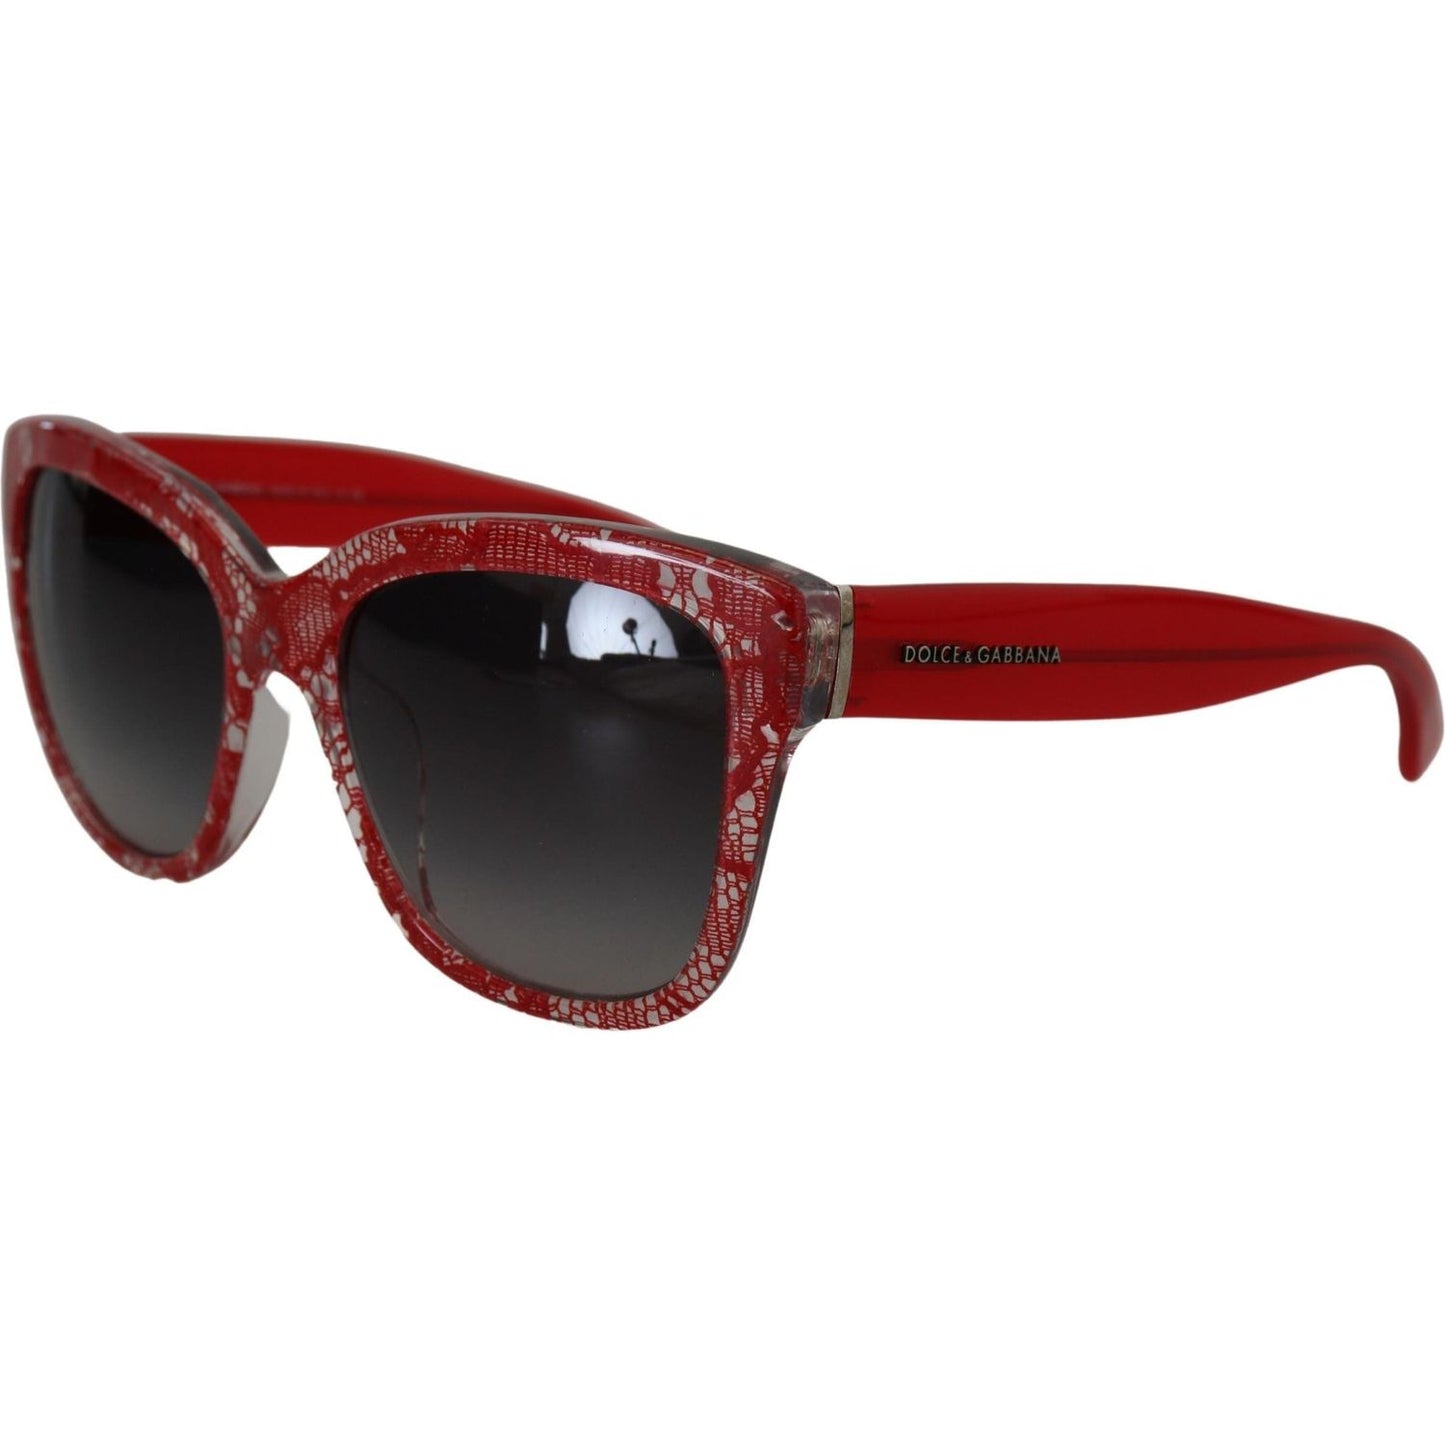 Dolce & Gabbana Elegant Red Lace-Insert Sunglasses red-lace-acetate-rectangle-shades-dg4226f-sunglasses